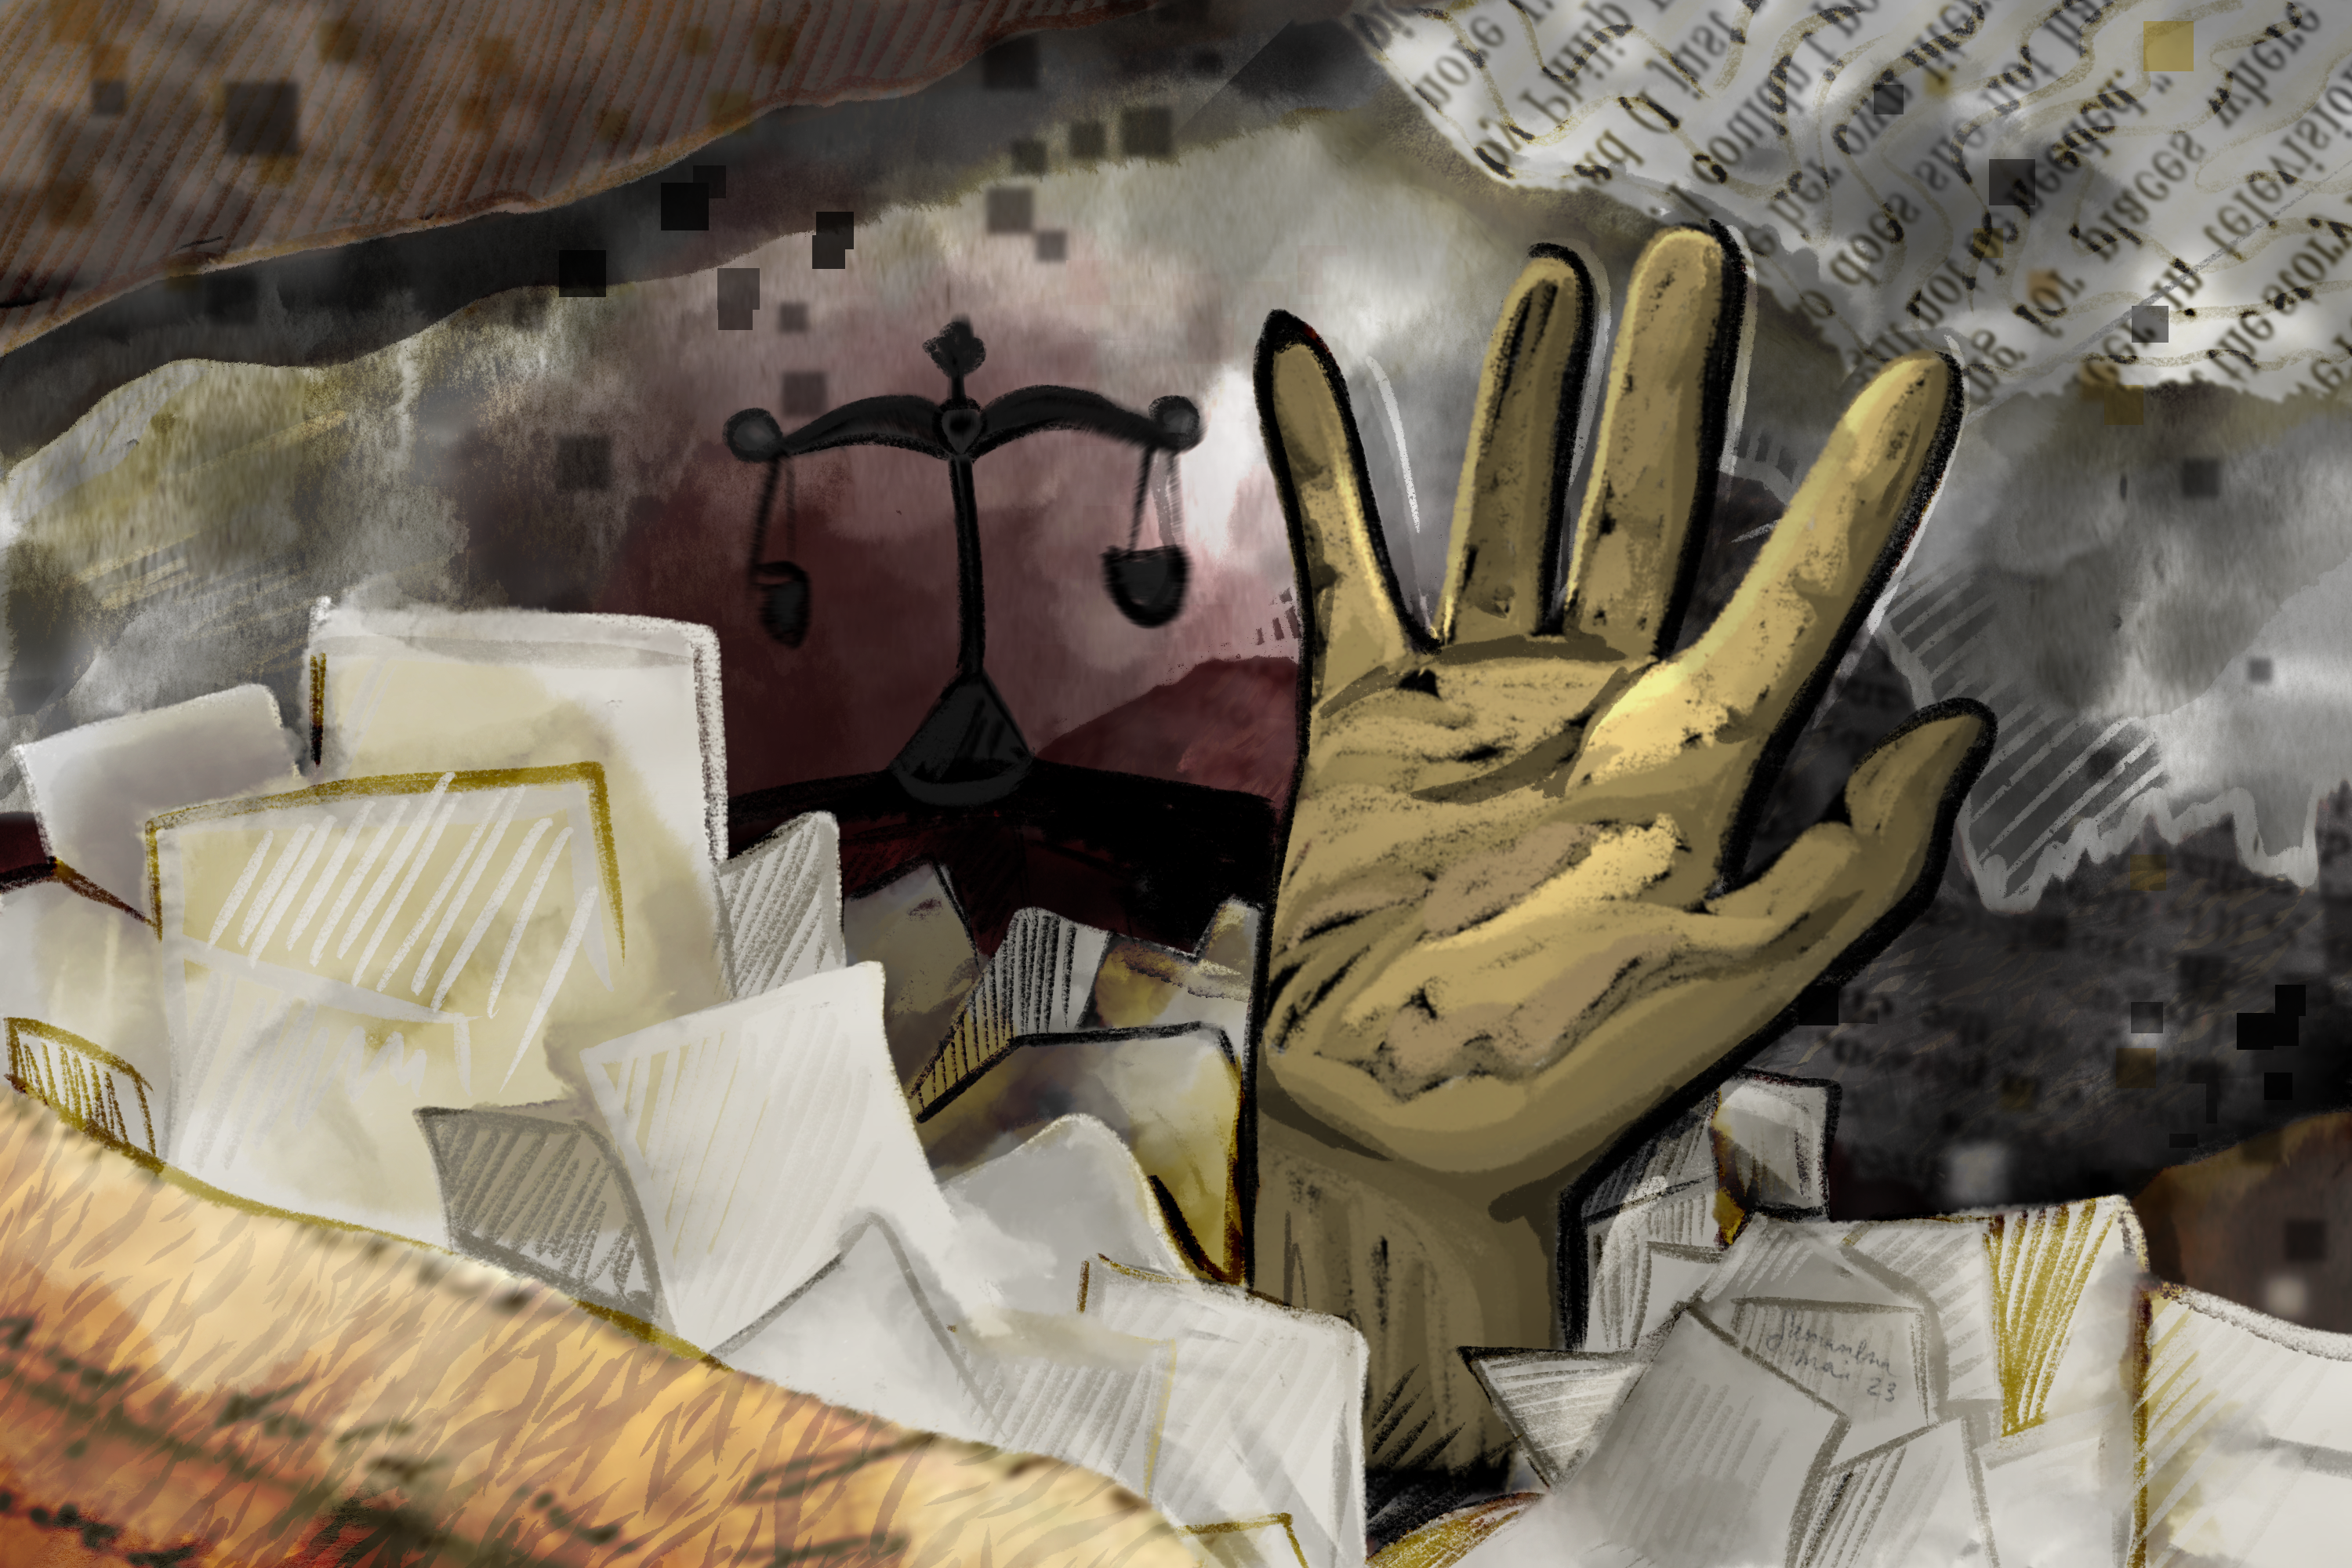 illustration of a hand reaching out of a pile of law papers and a scale